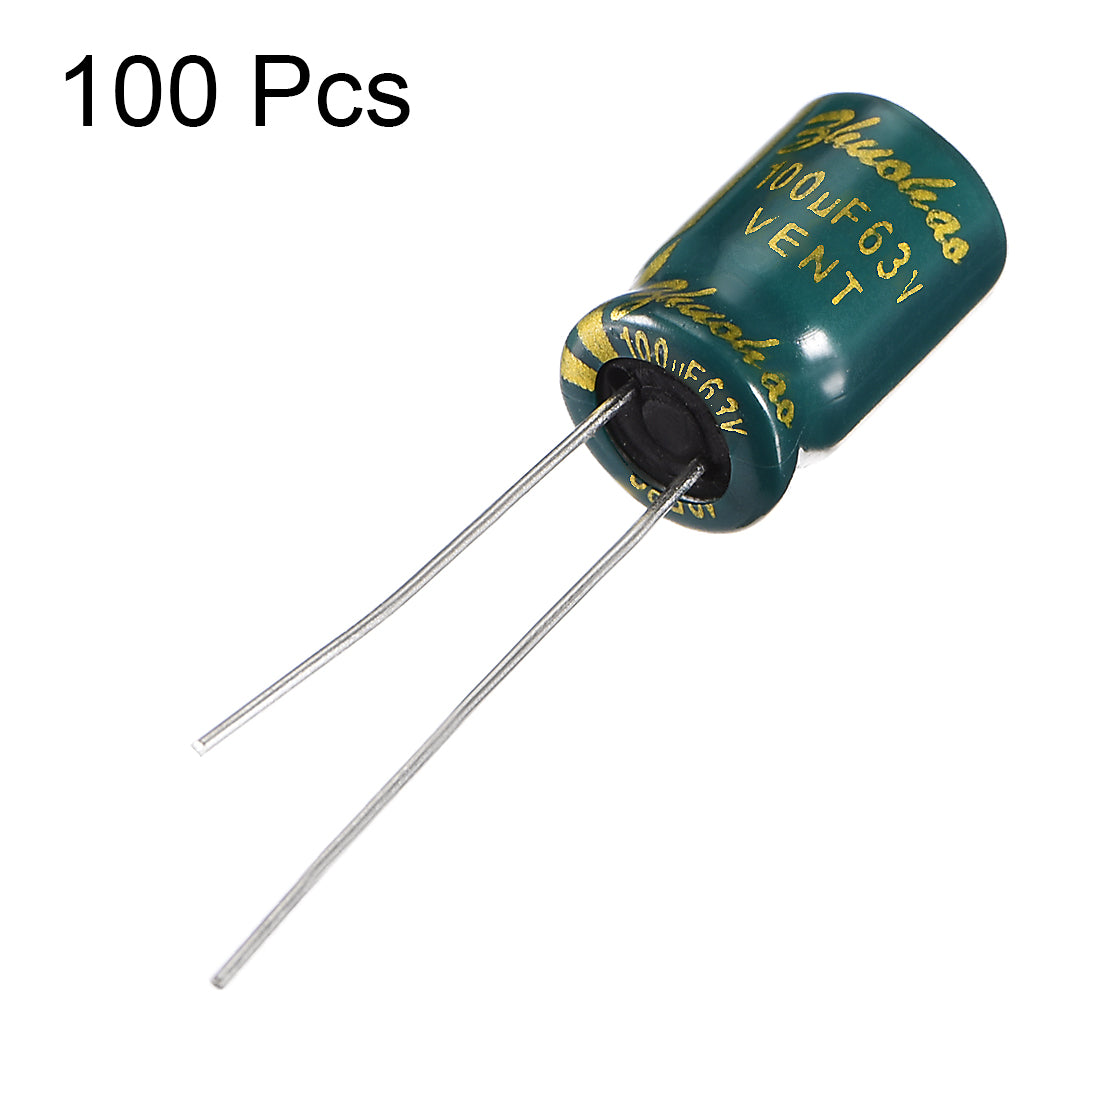 uxcell Uxcell Aluminum Radial Electrolytic Capacitor Low ESR Green with 100UF 63V 105 Celsius Life 3000H 8 x 12 mm High Ripple Current,Low Impedance 100pcs